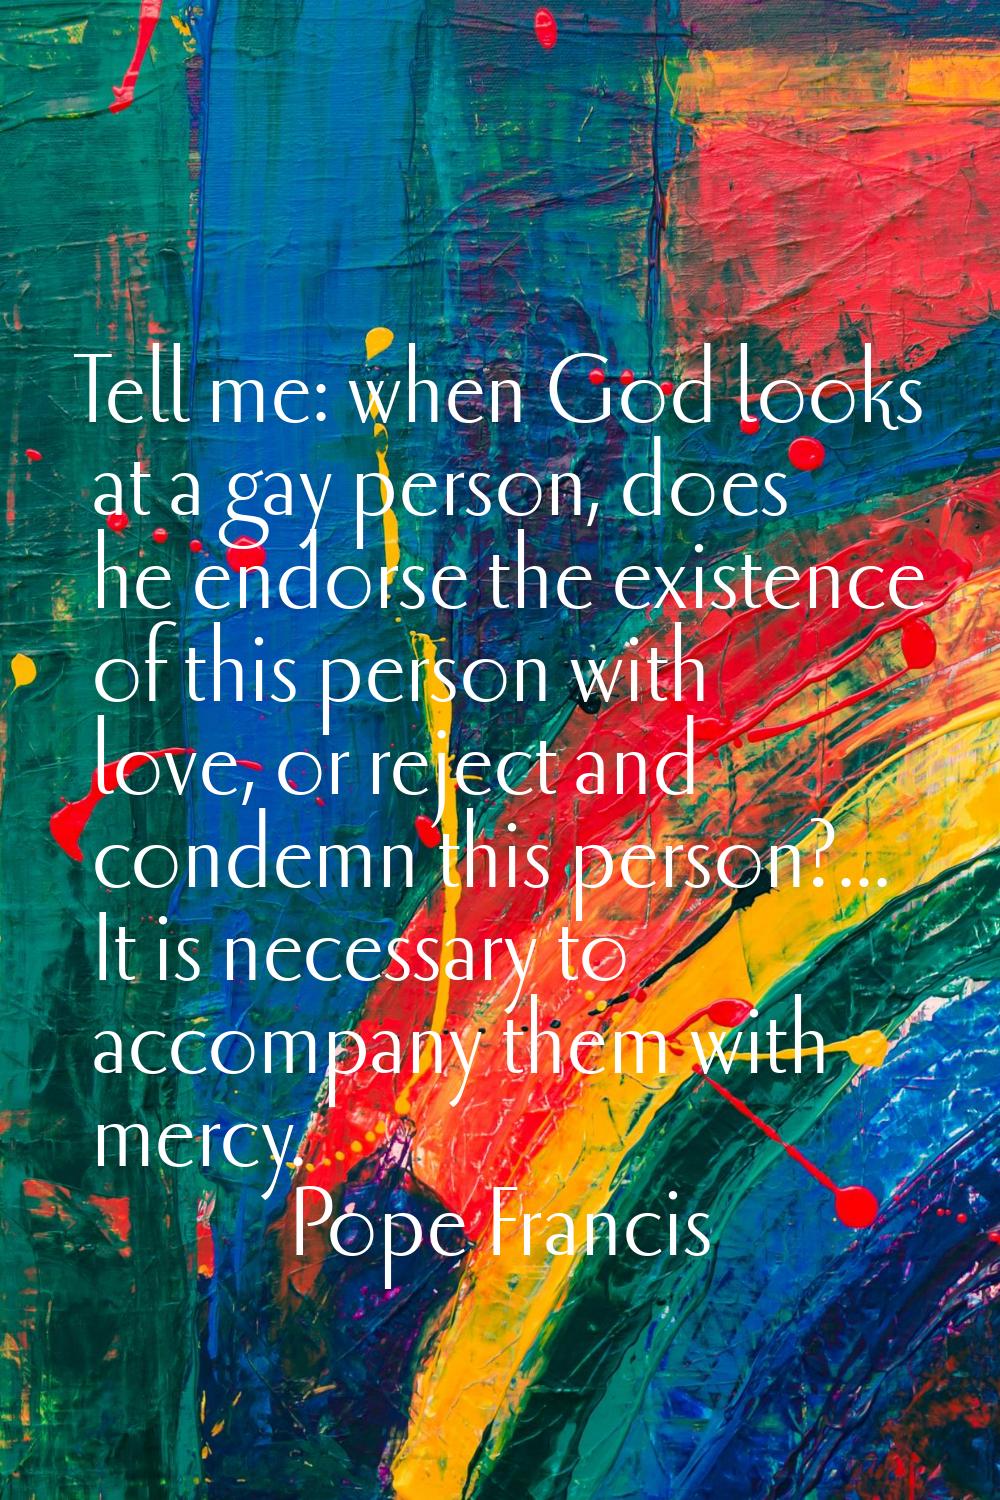 Tell me: when God looks at a gay person, does he endorse the existence of this person with love, or